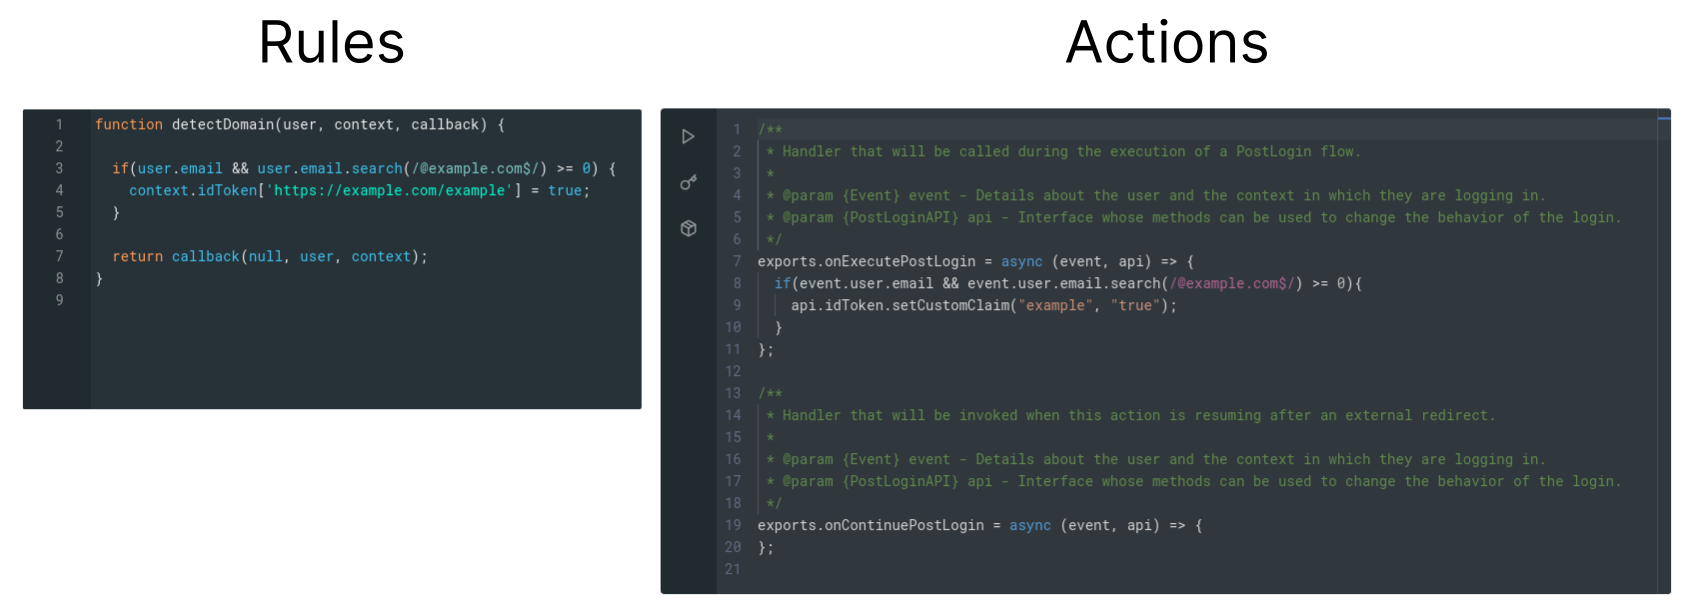 The difference between the Rules and Actions editors